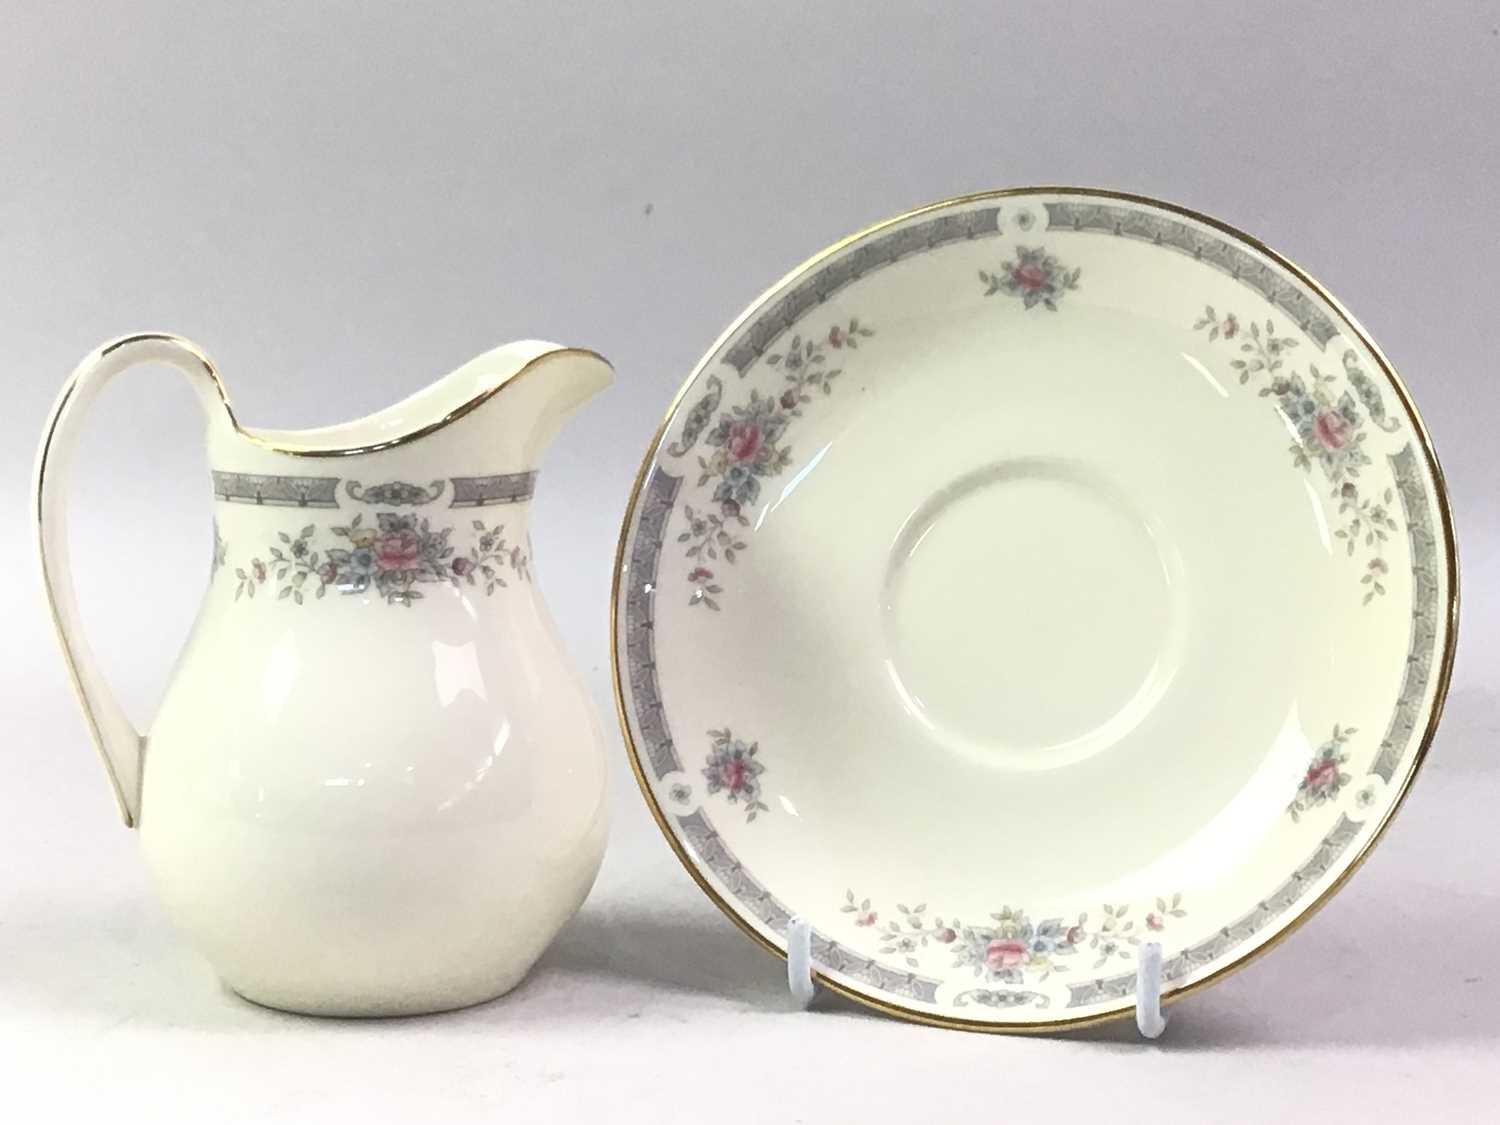 ROYAL DOULTON COFFEE AND DINNER SET, REBECCA PATTERN